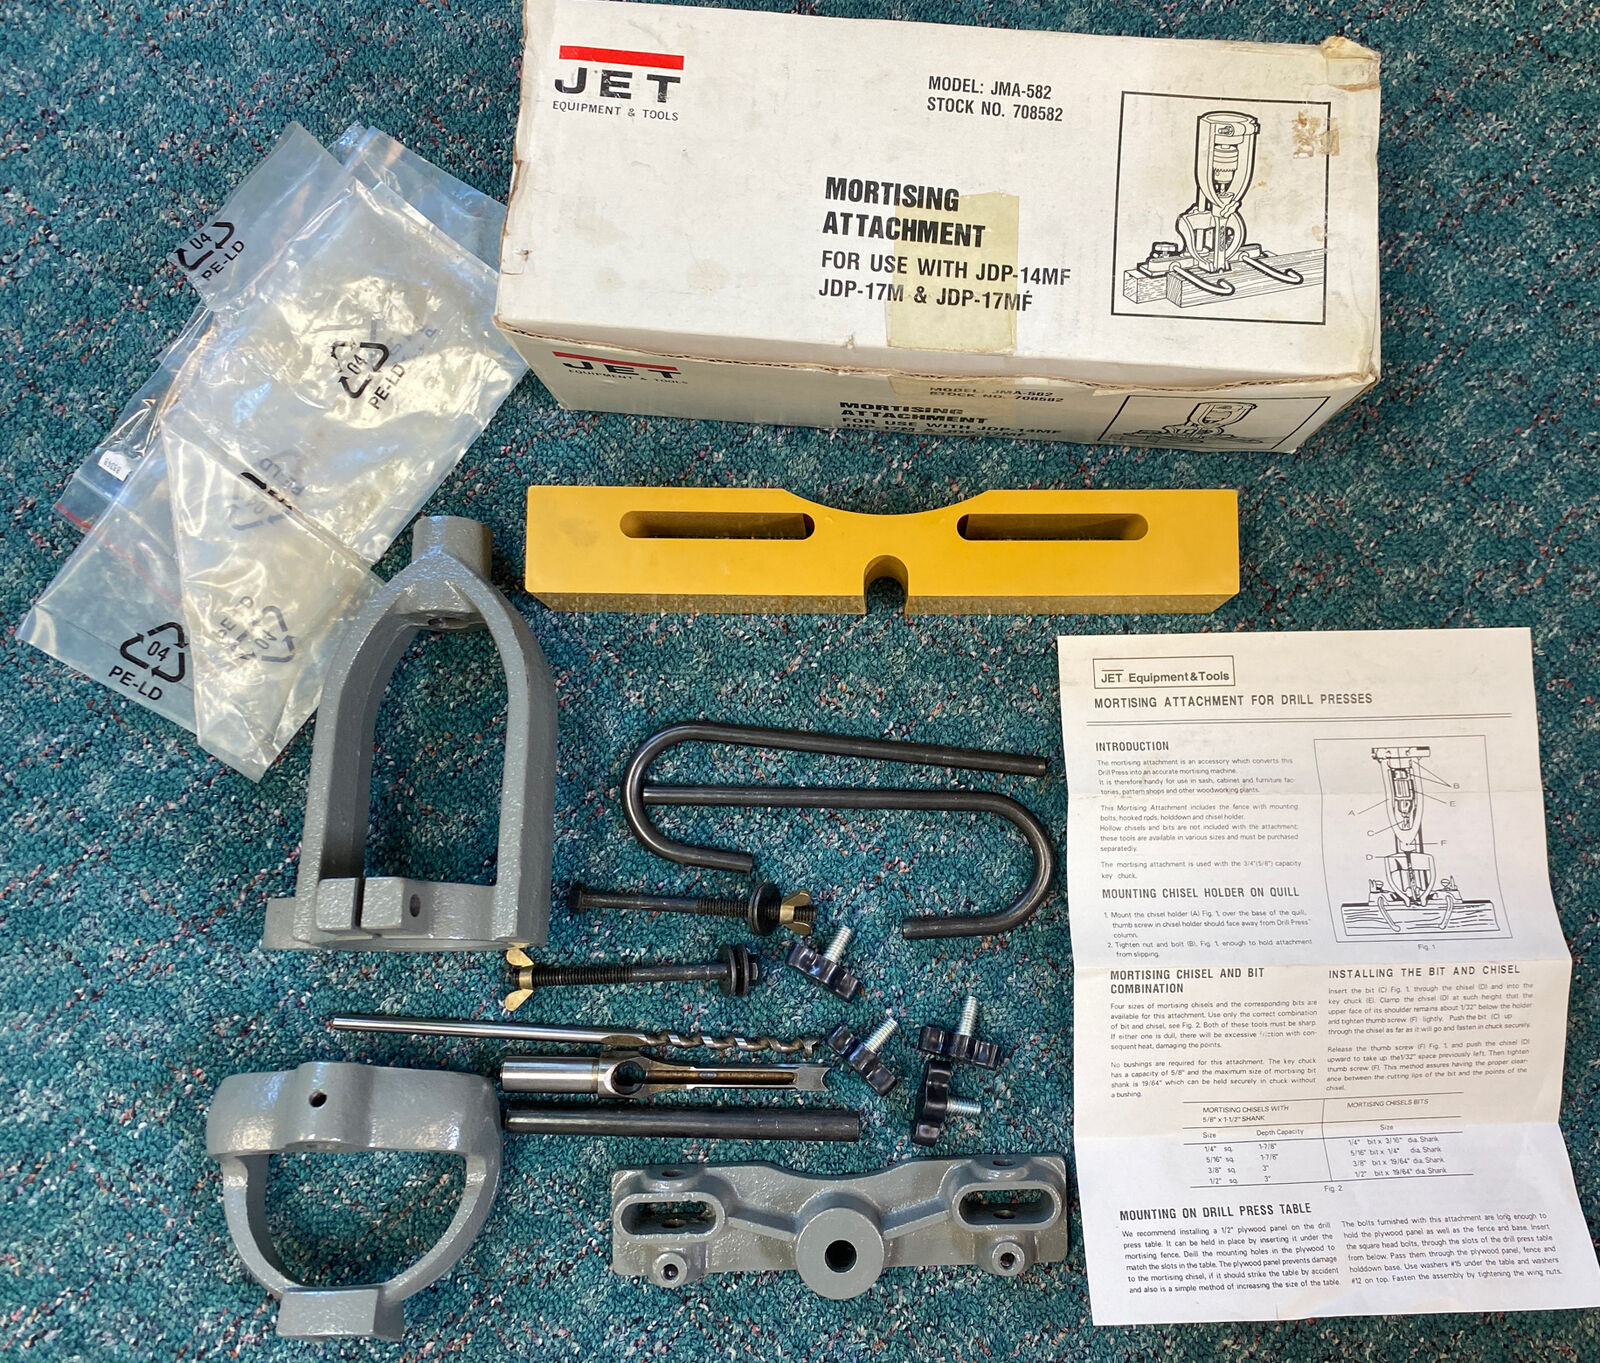 Jet Mortising Attachment For Use With Drill Press Model Jma-582 W/ Bit & Chisel